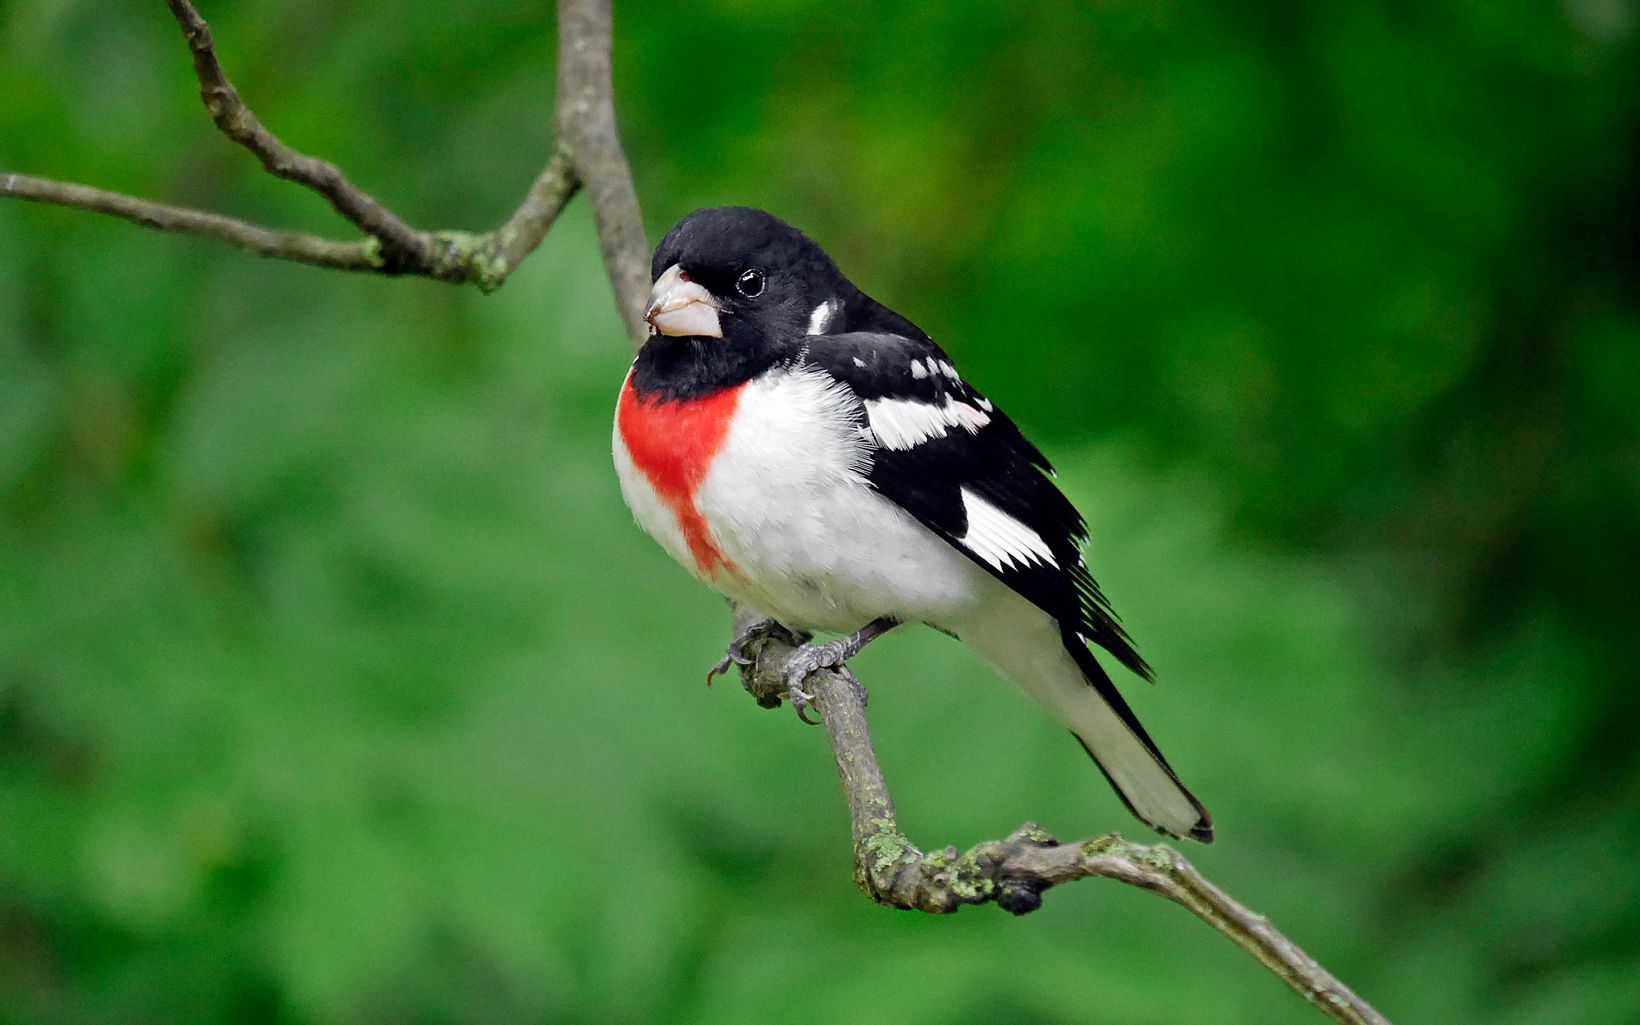 A black, red and white bird rests on a branch.